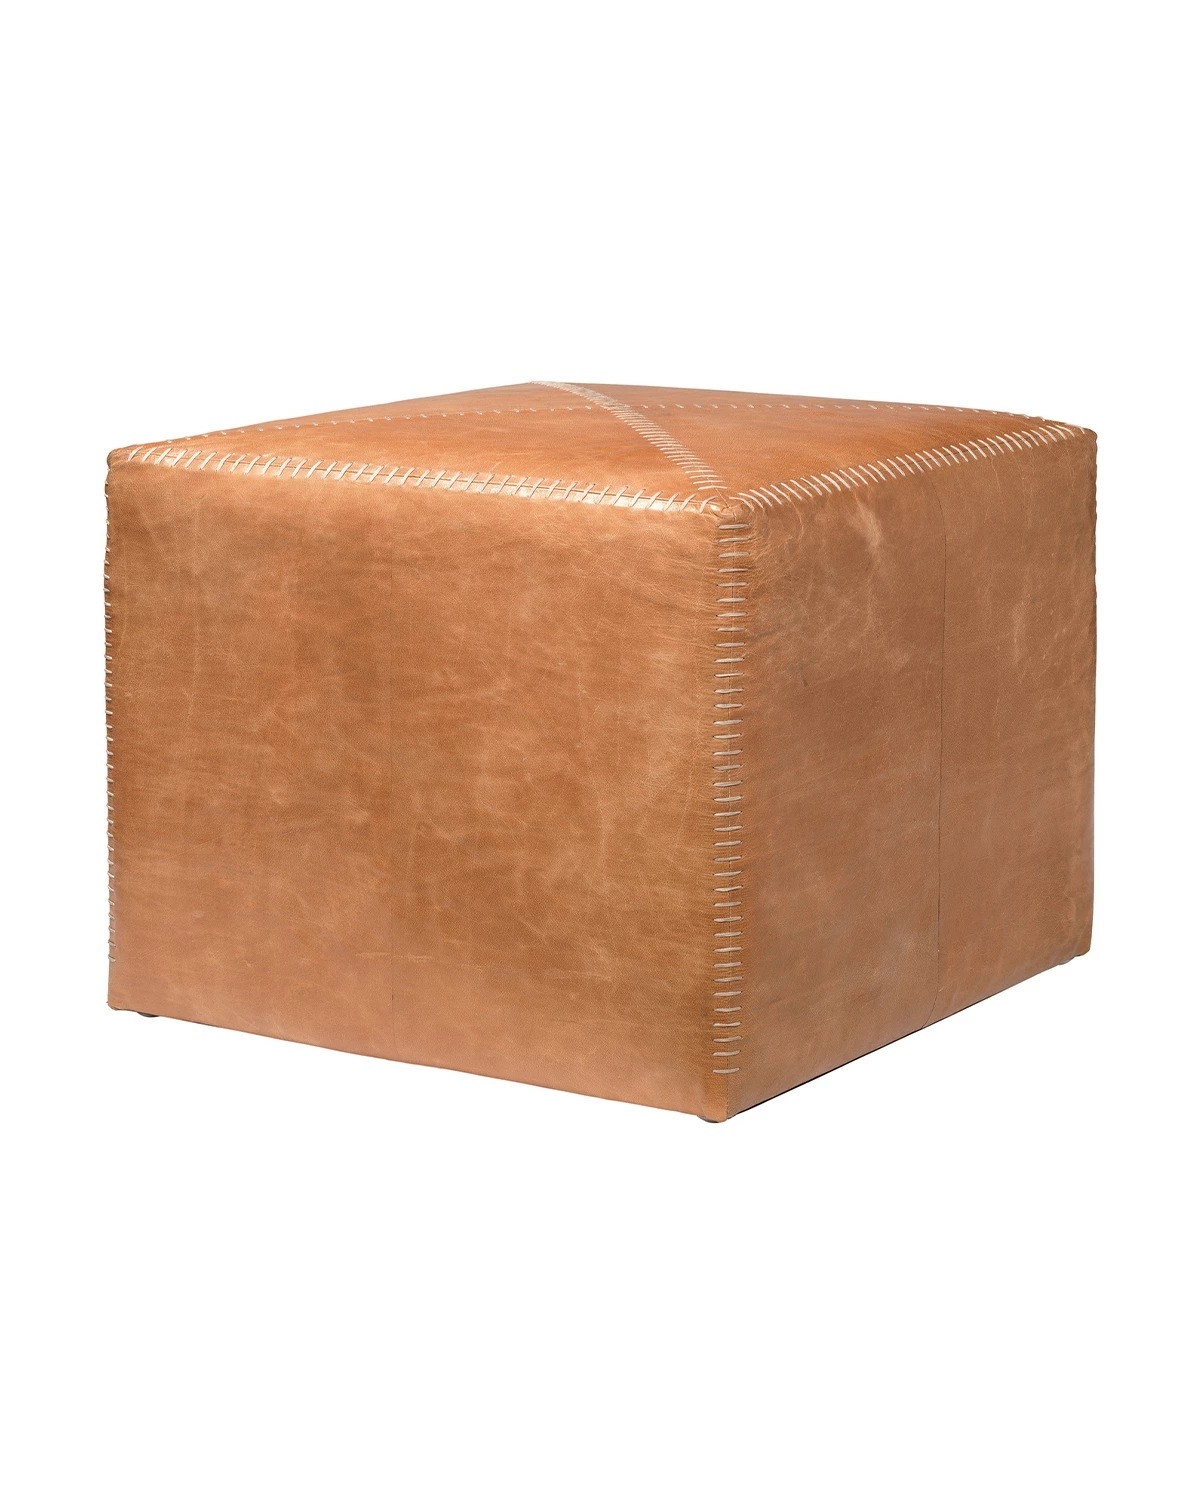 GABBY LEATHER OTTOMAN - SMALL - Image 0